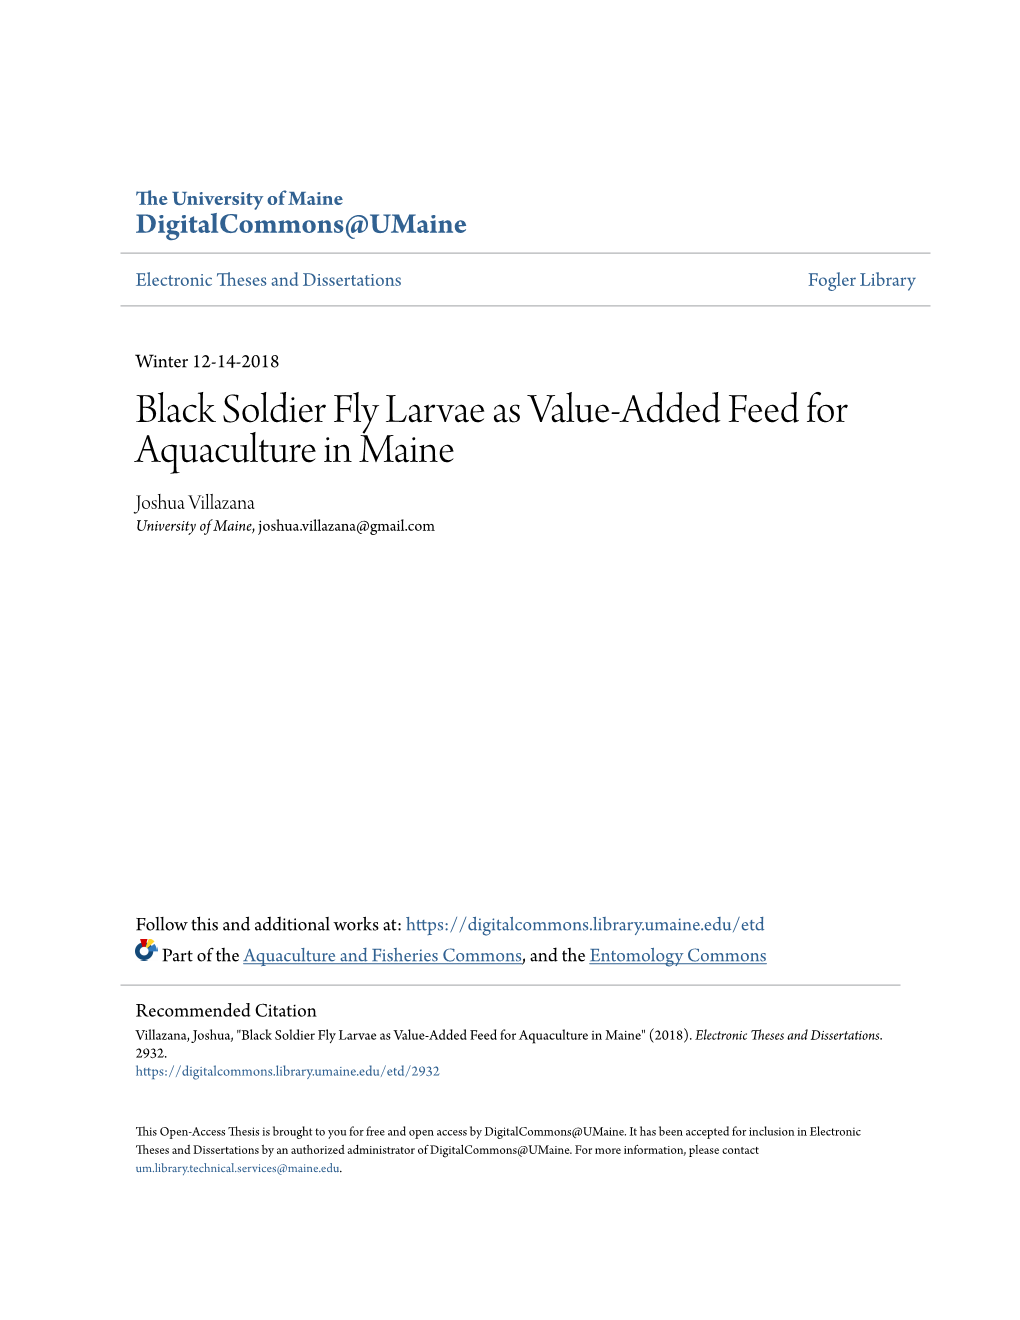 Black Soldier Fly Larvae As Value-Added Feed for Aquaculture in Maine Joshua Villazana University of Maine, Joshua.Villazana@Gmail.Com